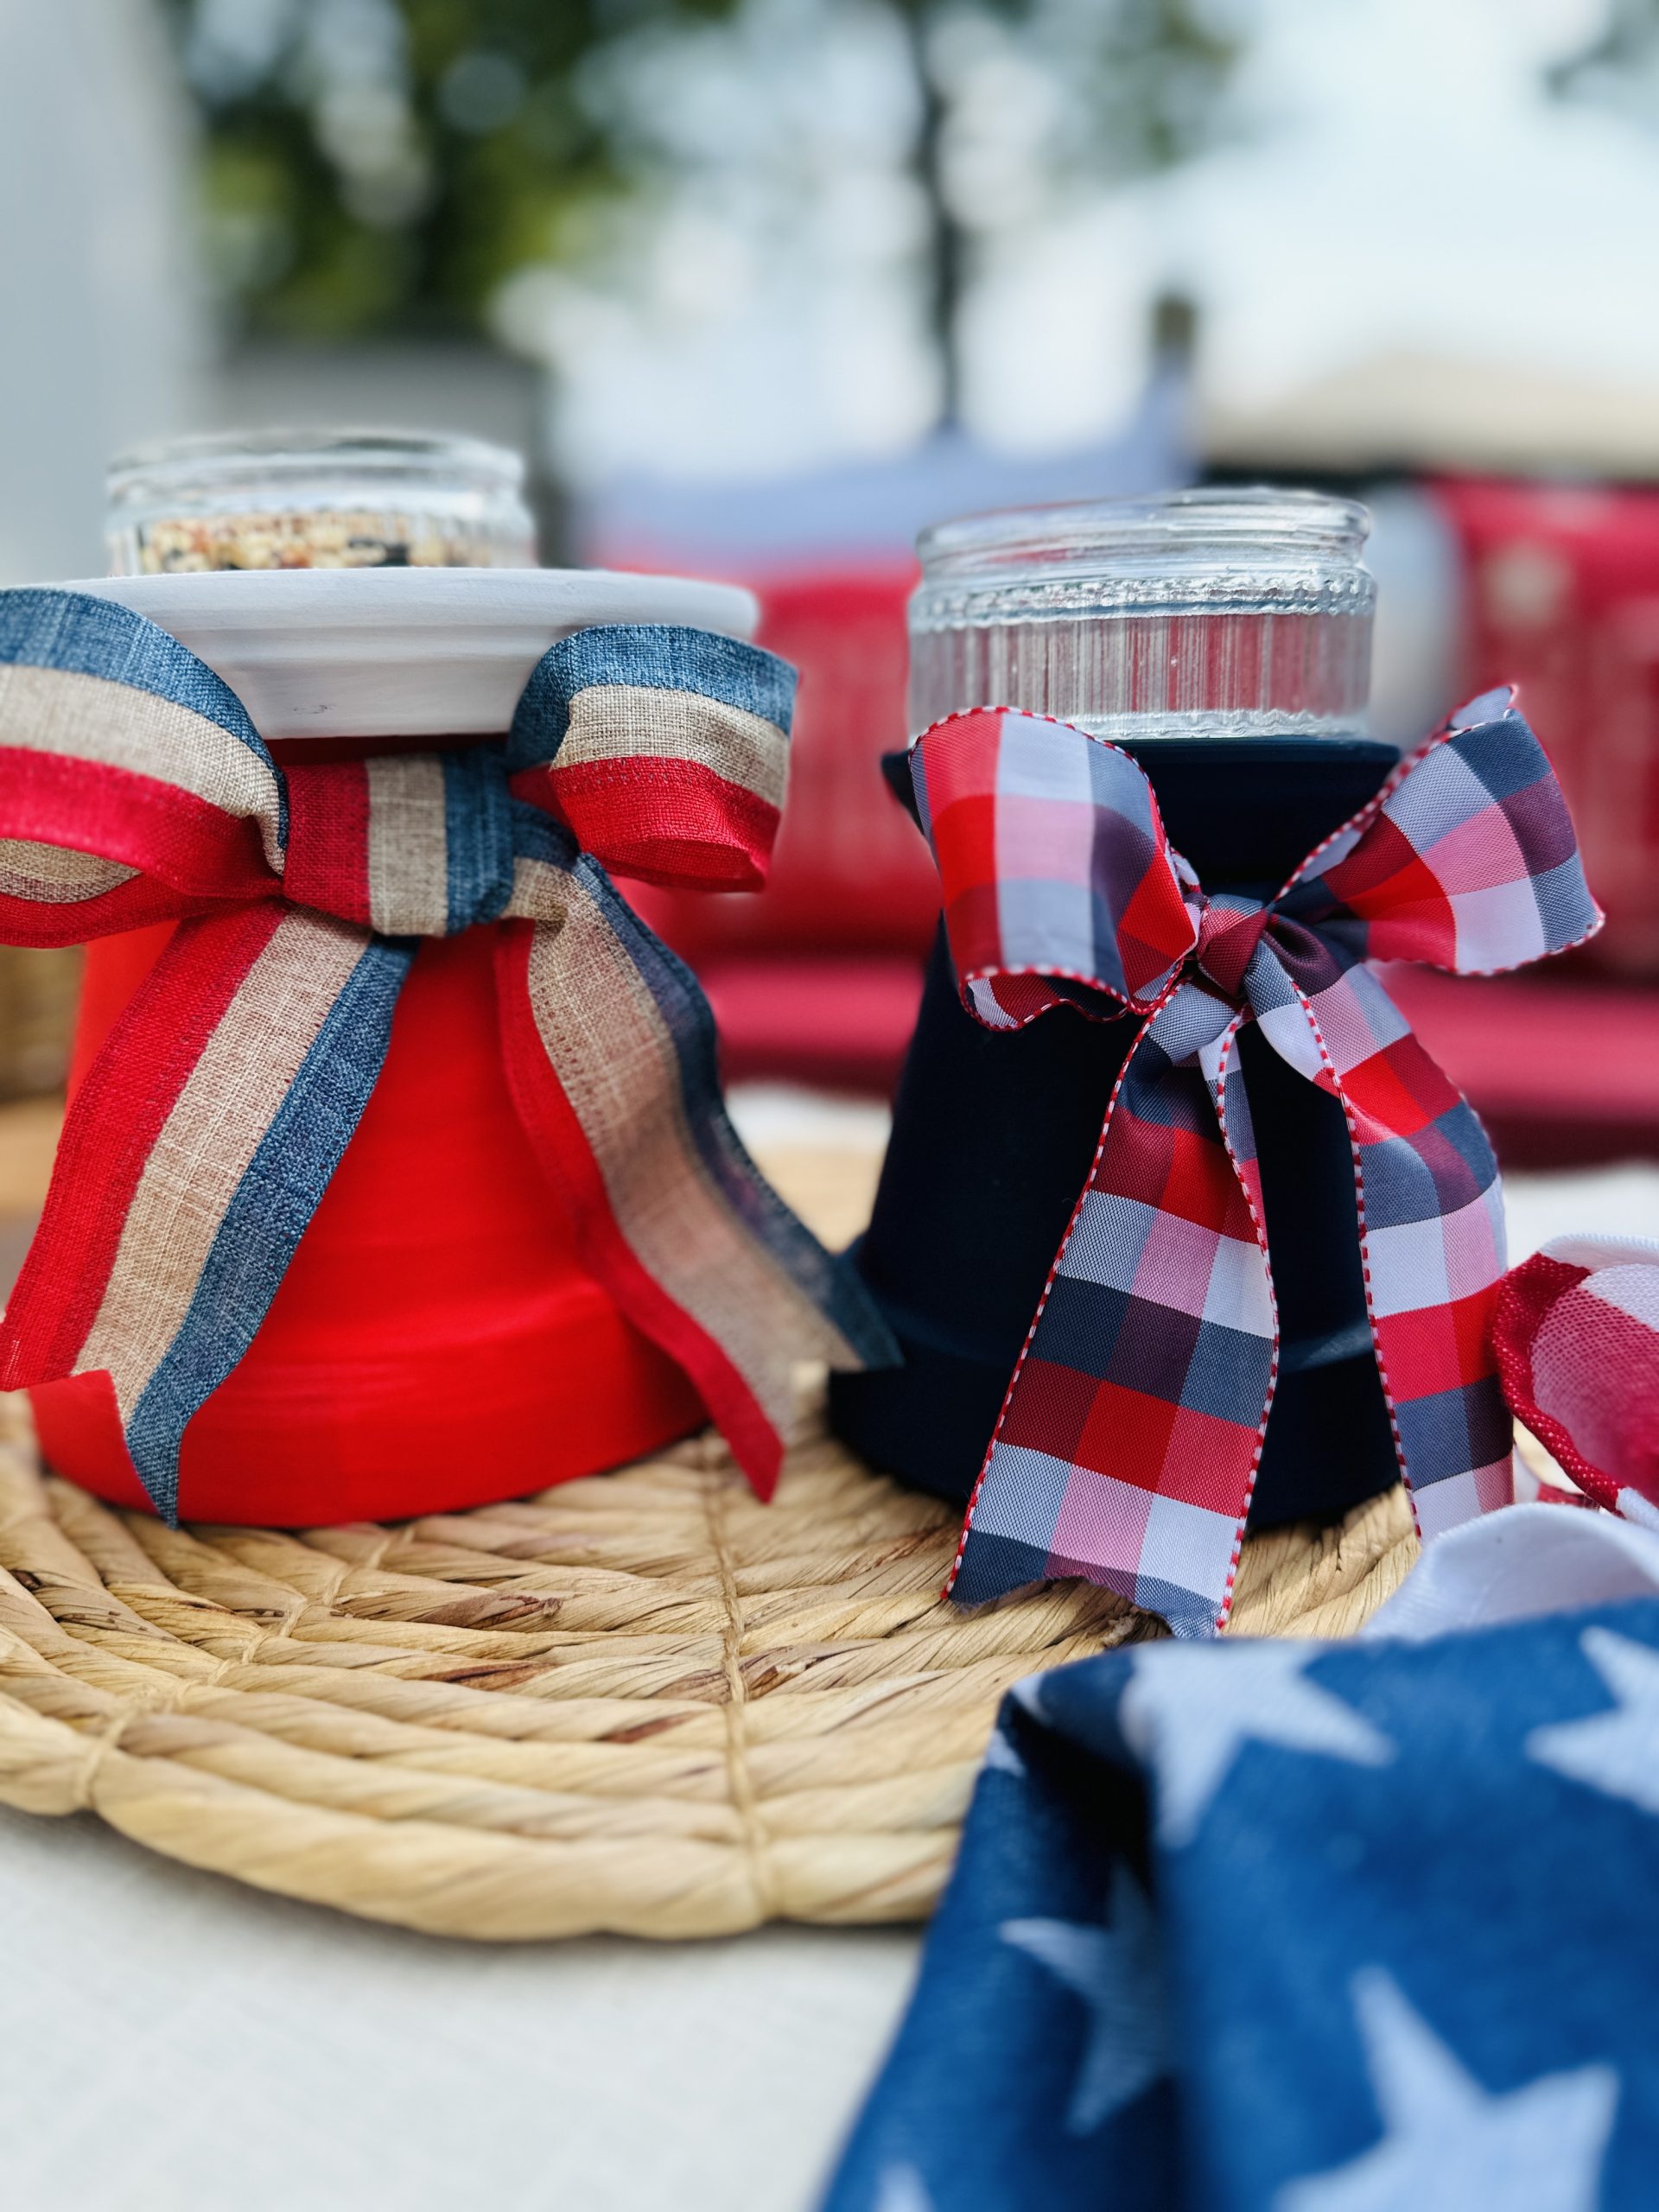 How to Paint Pots for the 4th of July